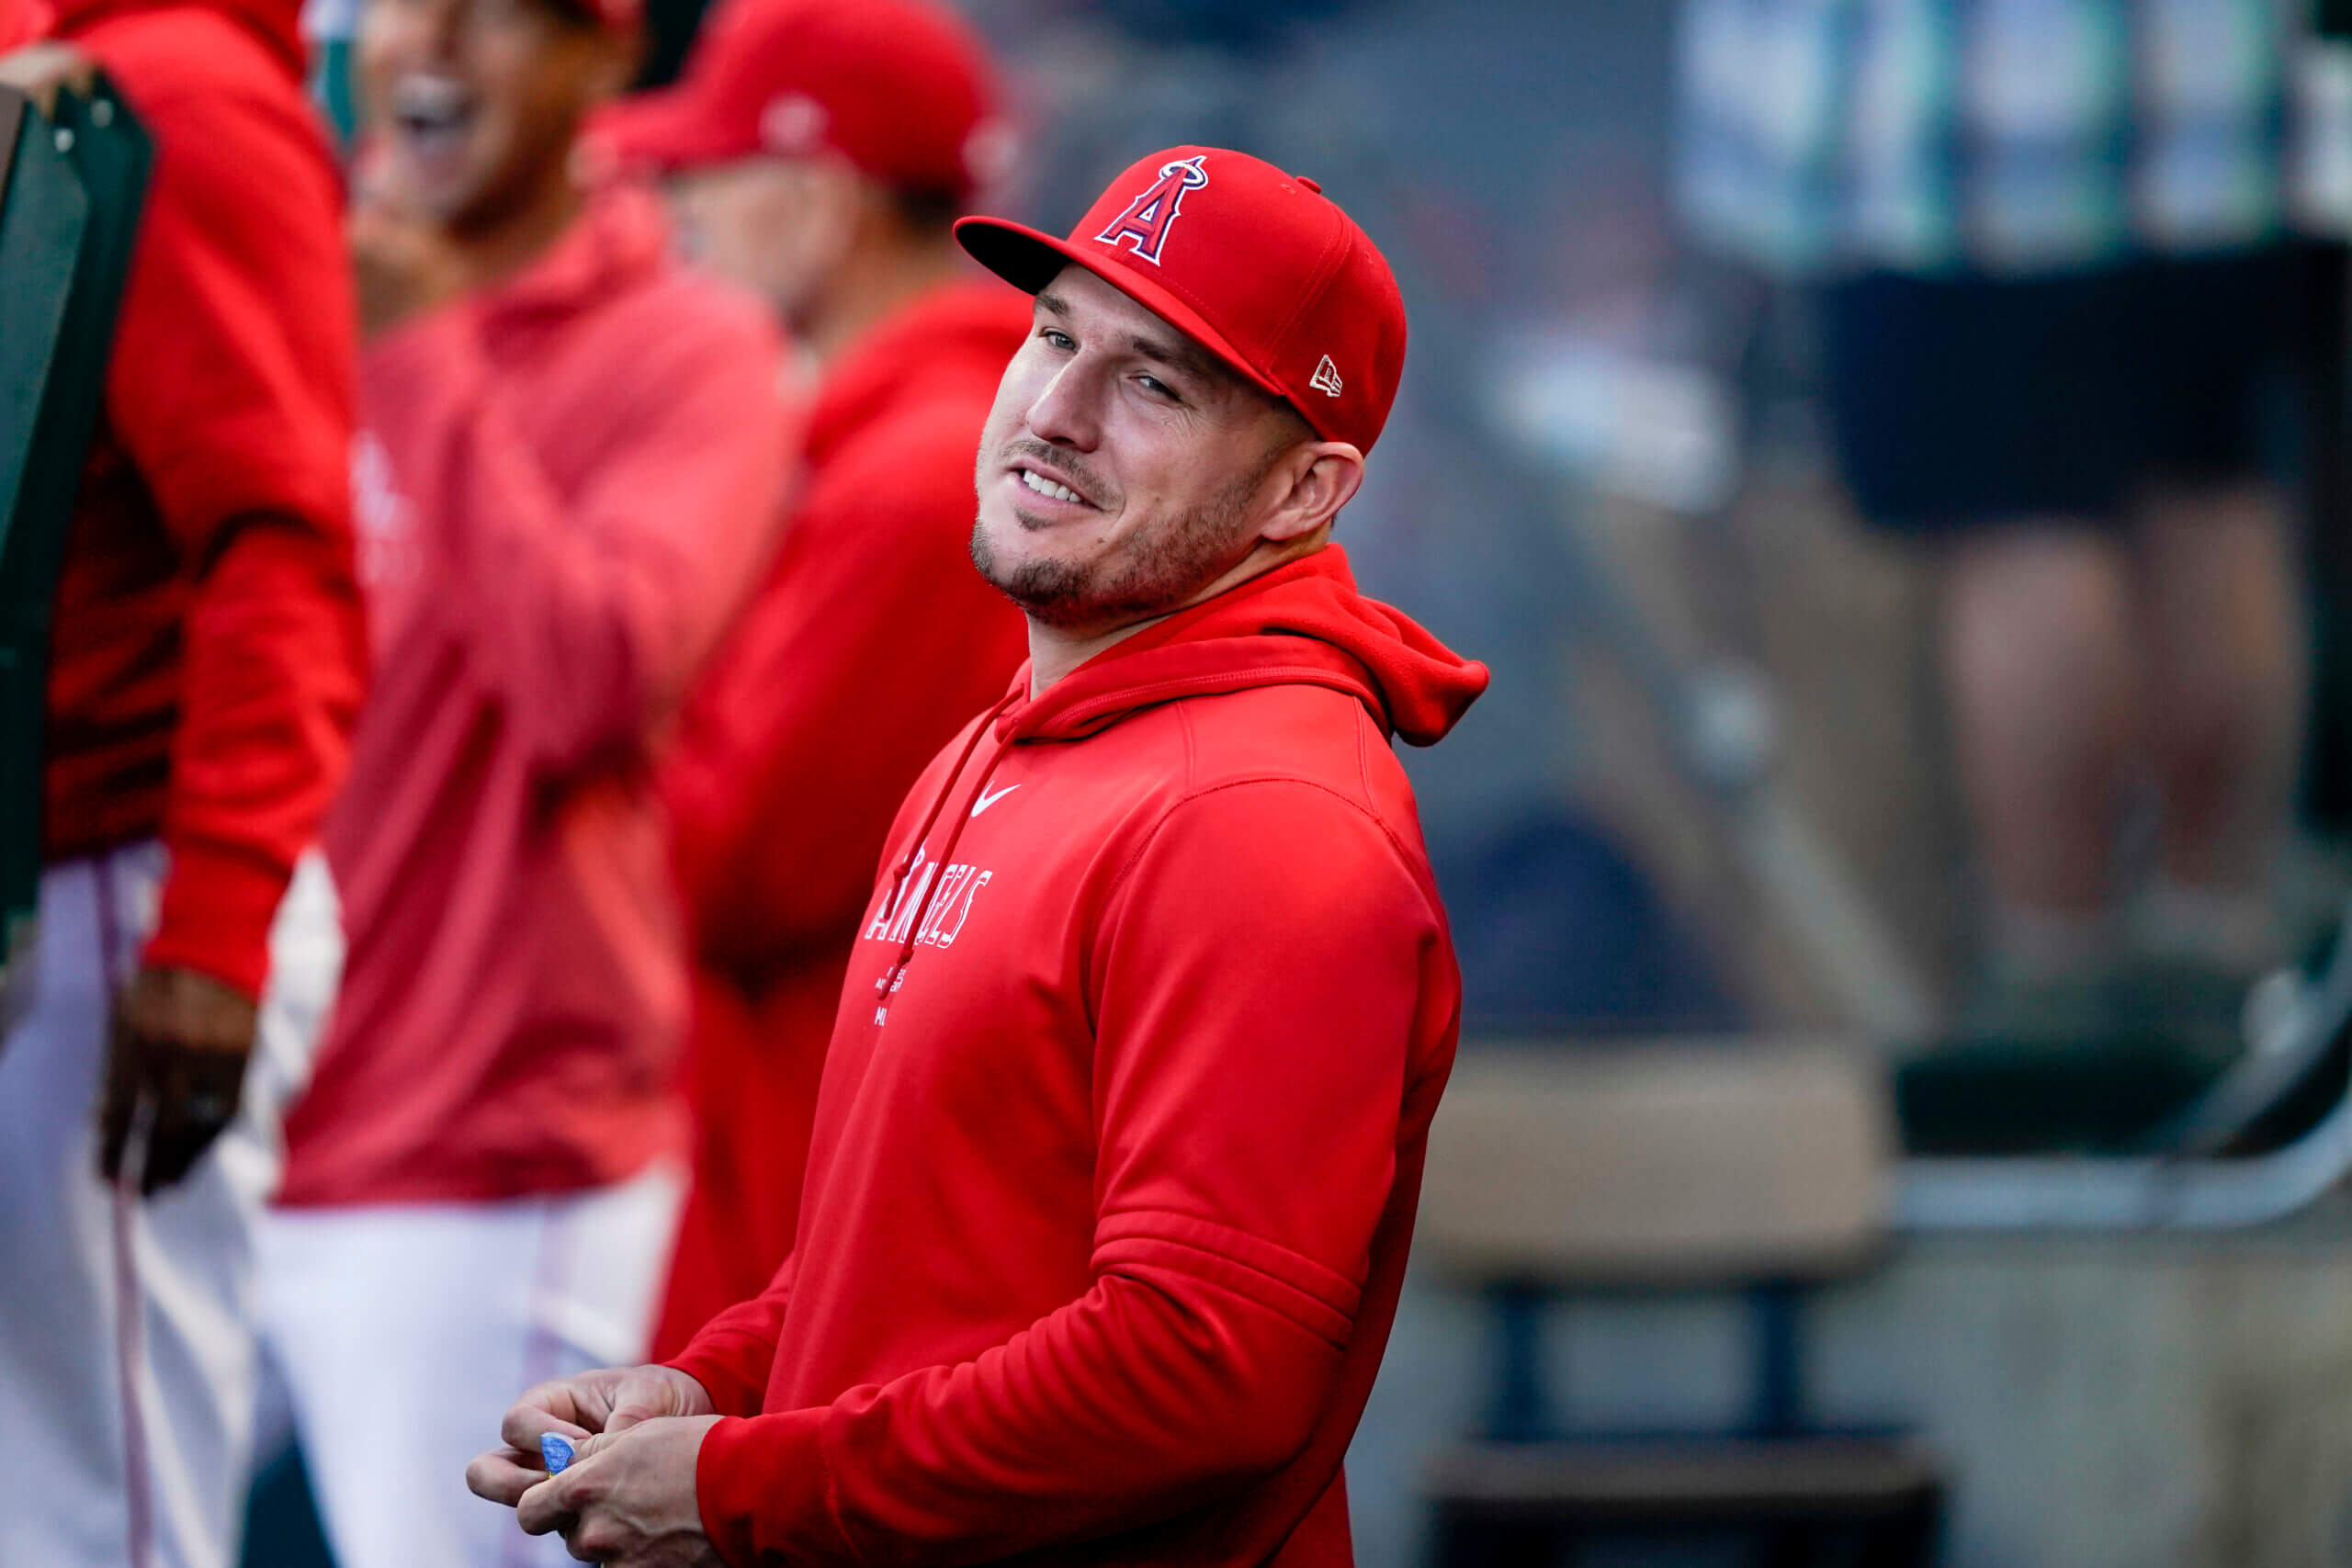 Mike Trout chose surgery over playing through knee injury as DH